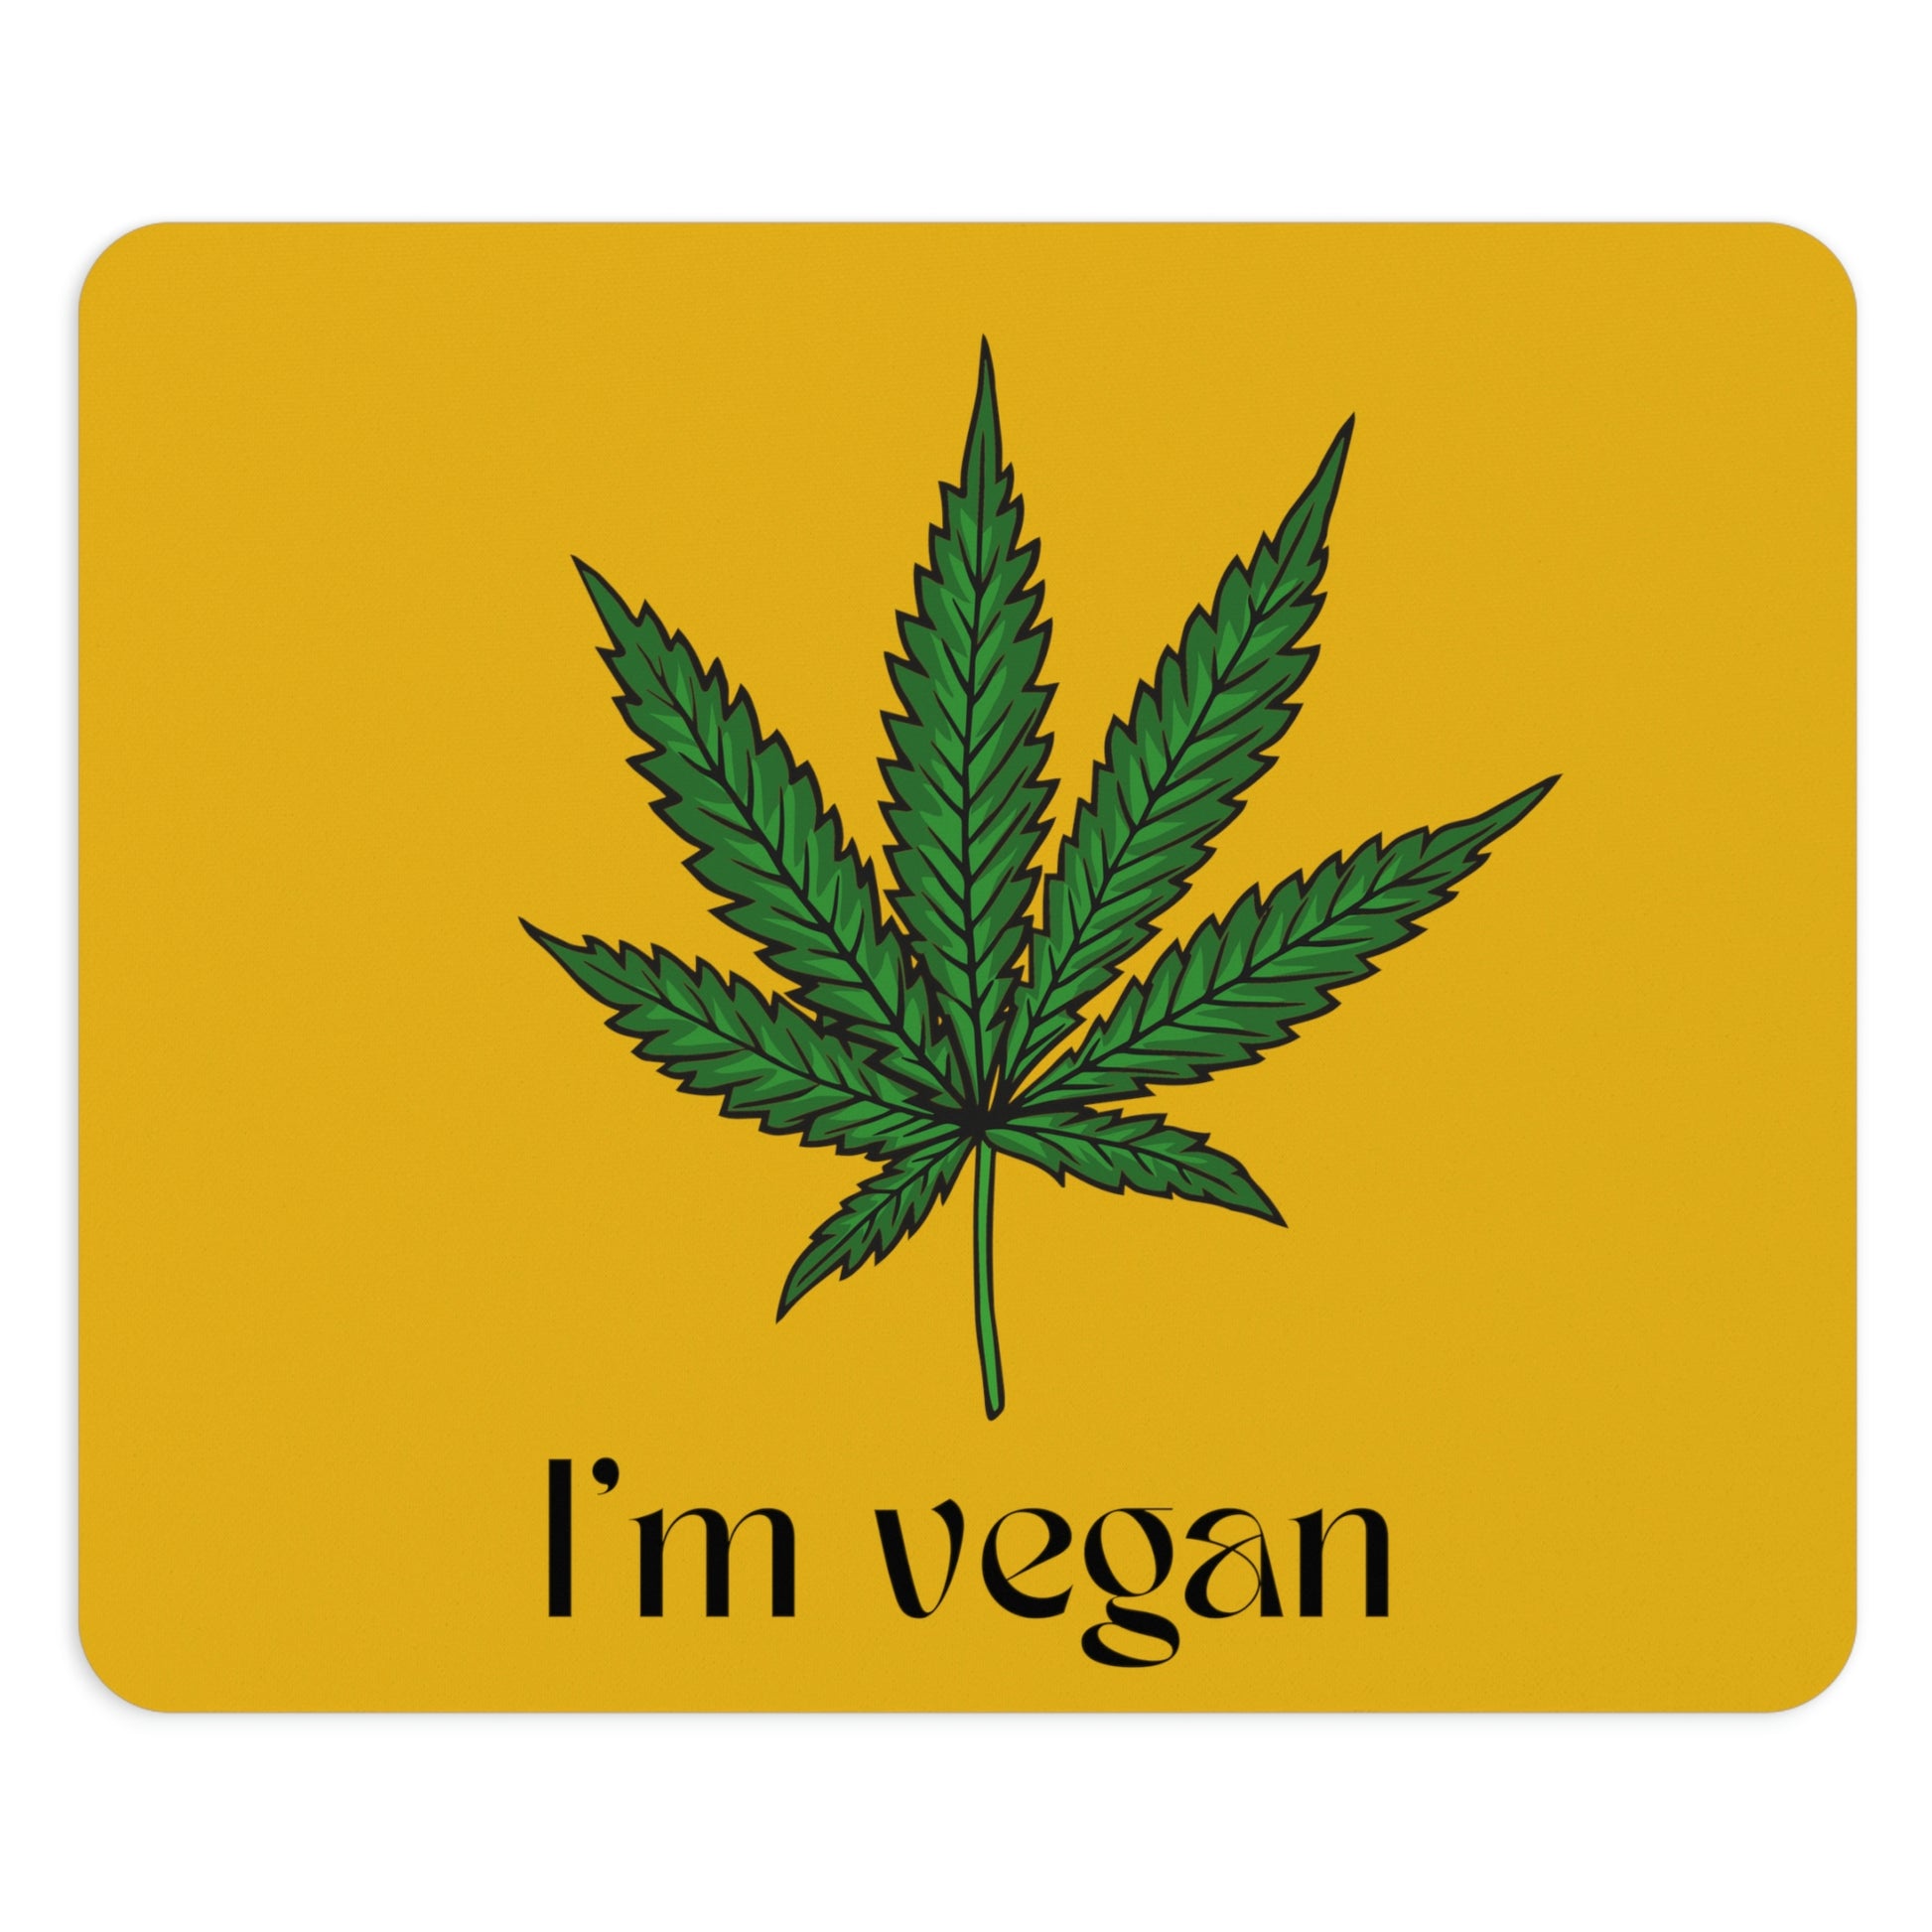 A perfect square designed I'm Vegan Cannabis Mouse Pad with huge green weed leaf in the center of it with yellow background.